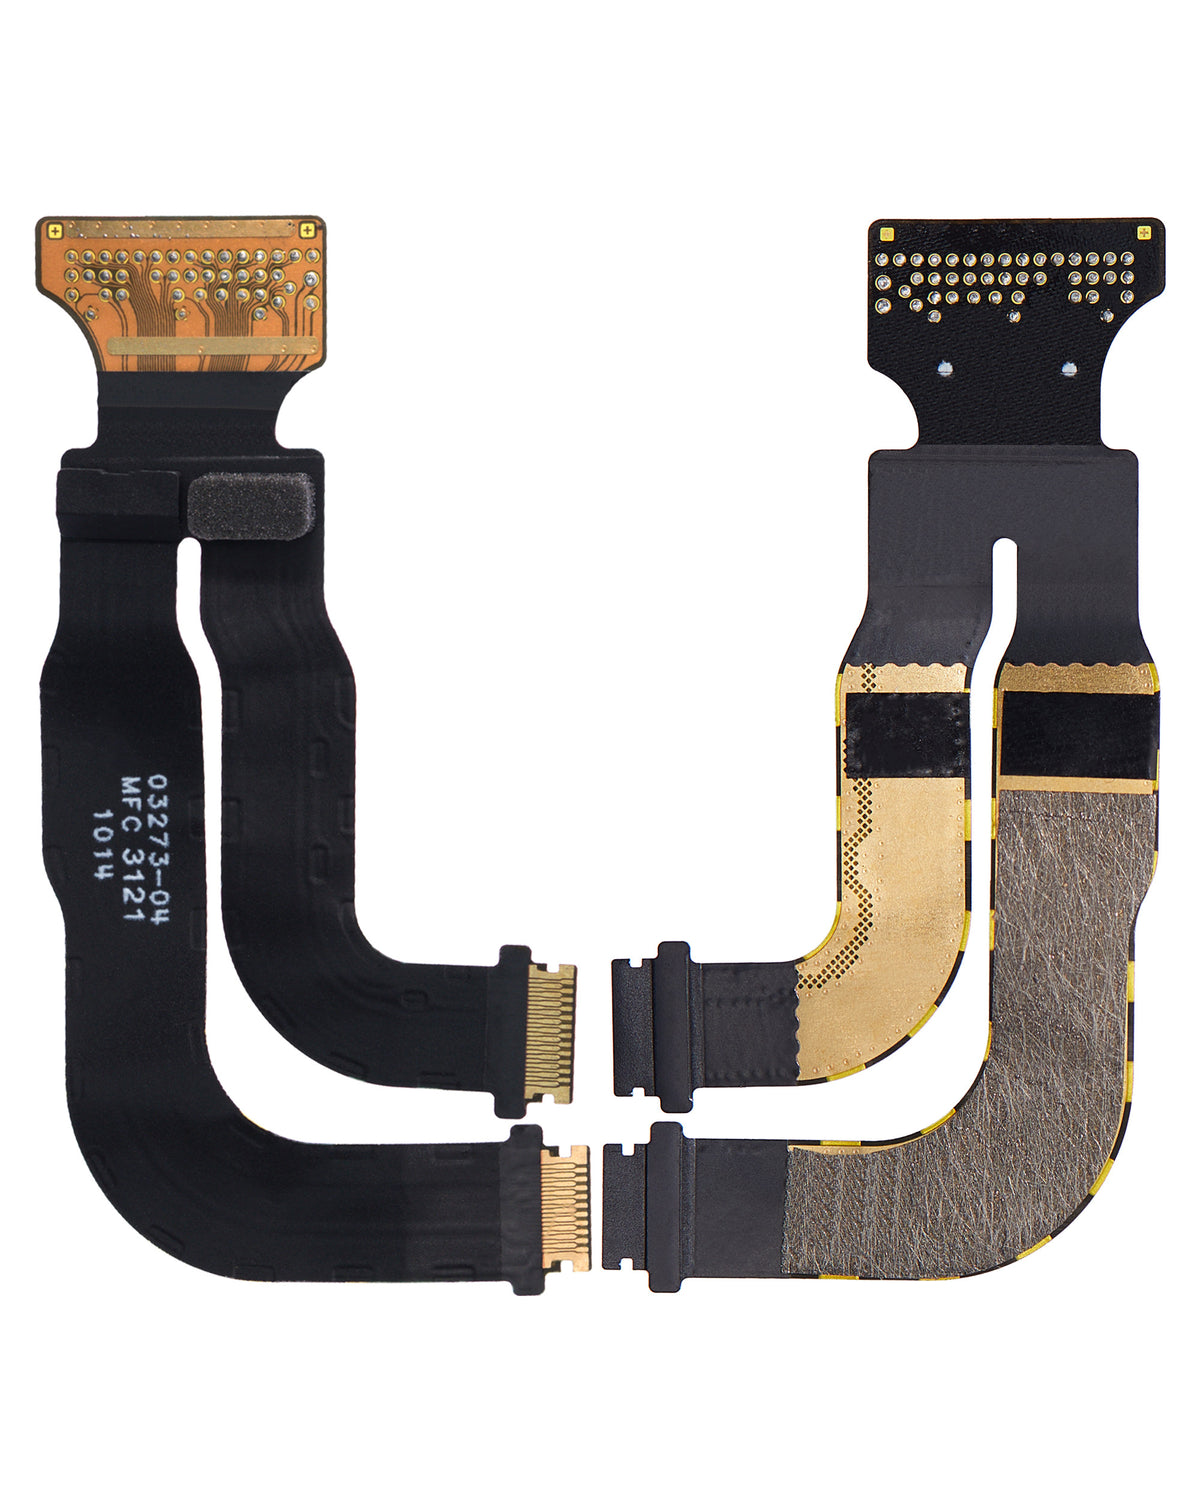 LCD FLEX CABLE FOR APPLE WATCH SERIES 7TH 41MM